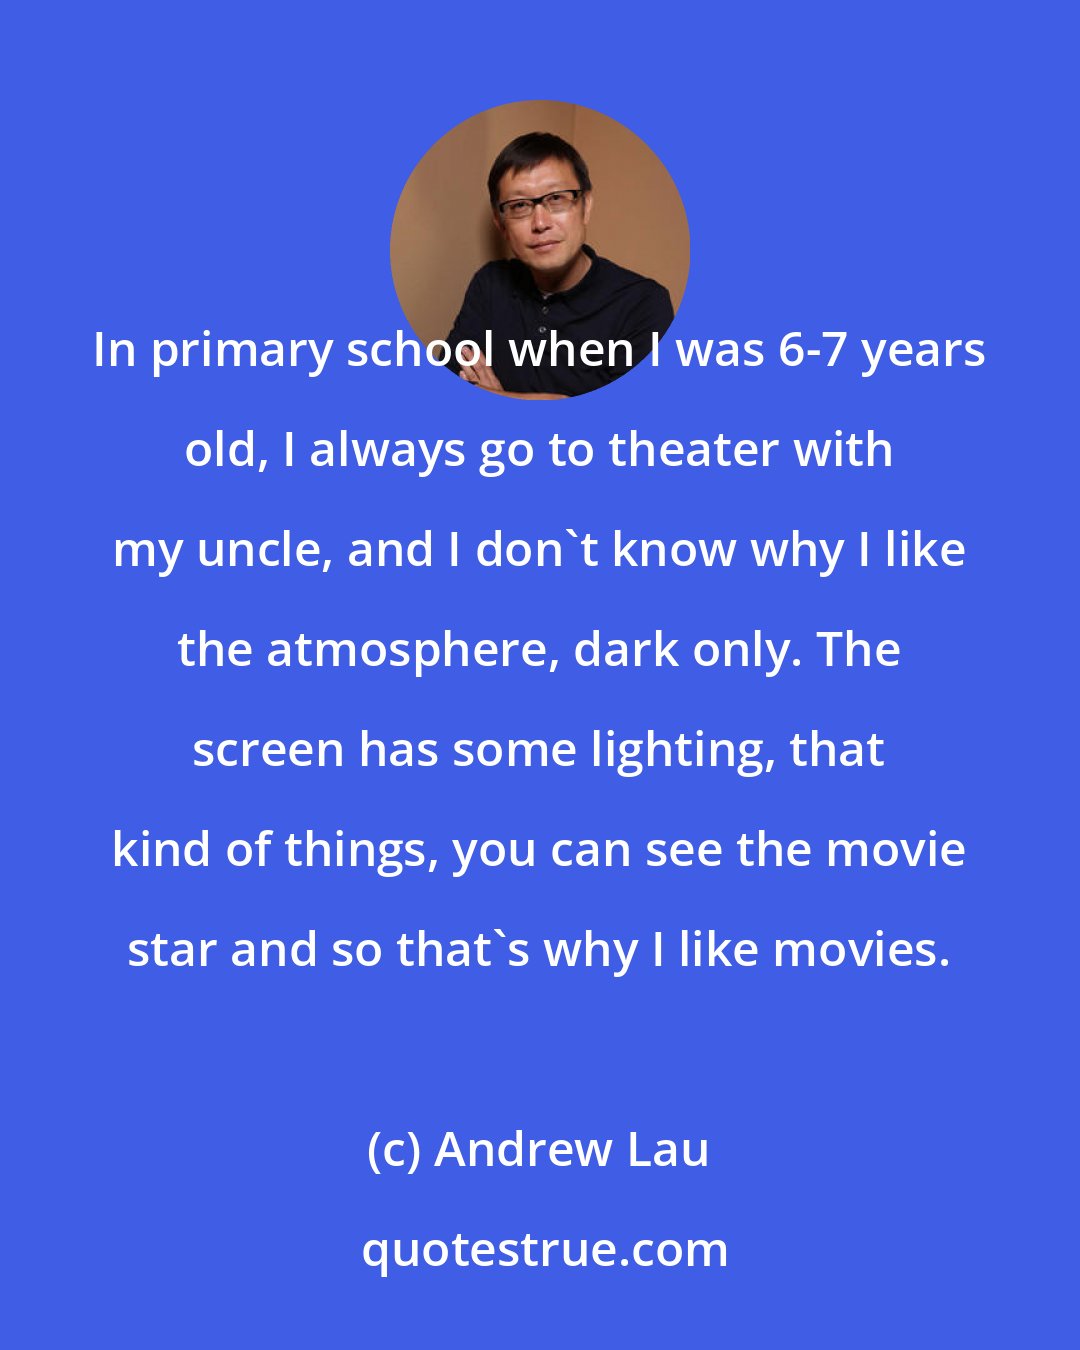 Andrew Lau: In primary school when I was 6-7 years old, I always go to theater with my uncle, and I don't know why I like the atmosphere, dark only. The screen has some lighting, that kind of things, you can see the movie star and so that's why I like movies.